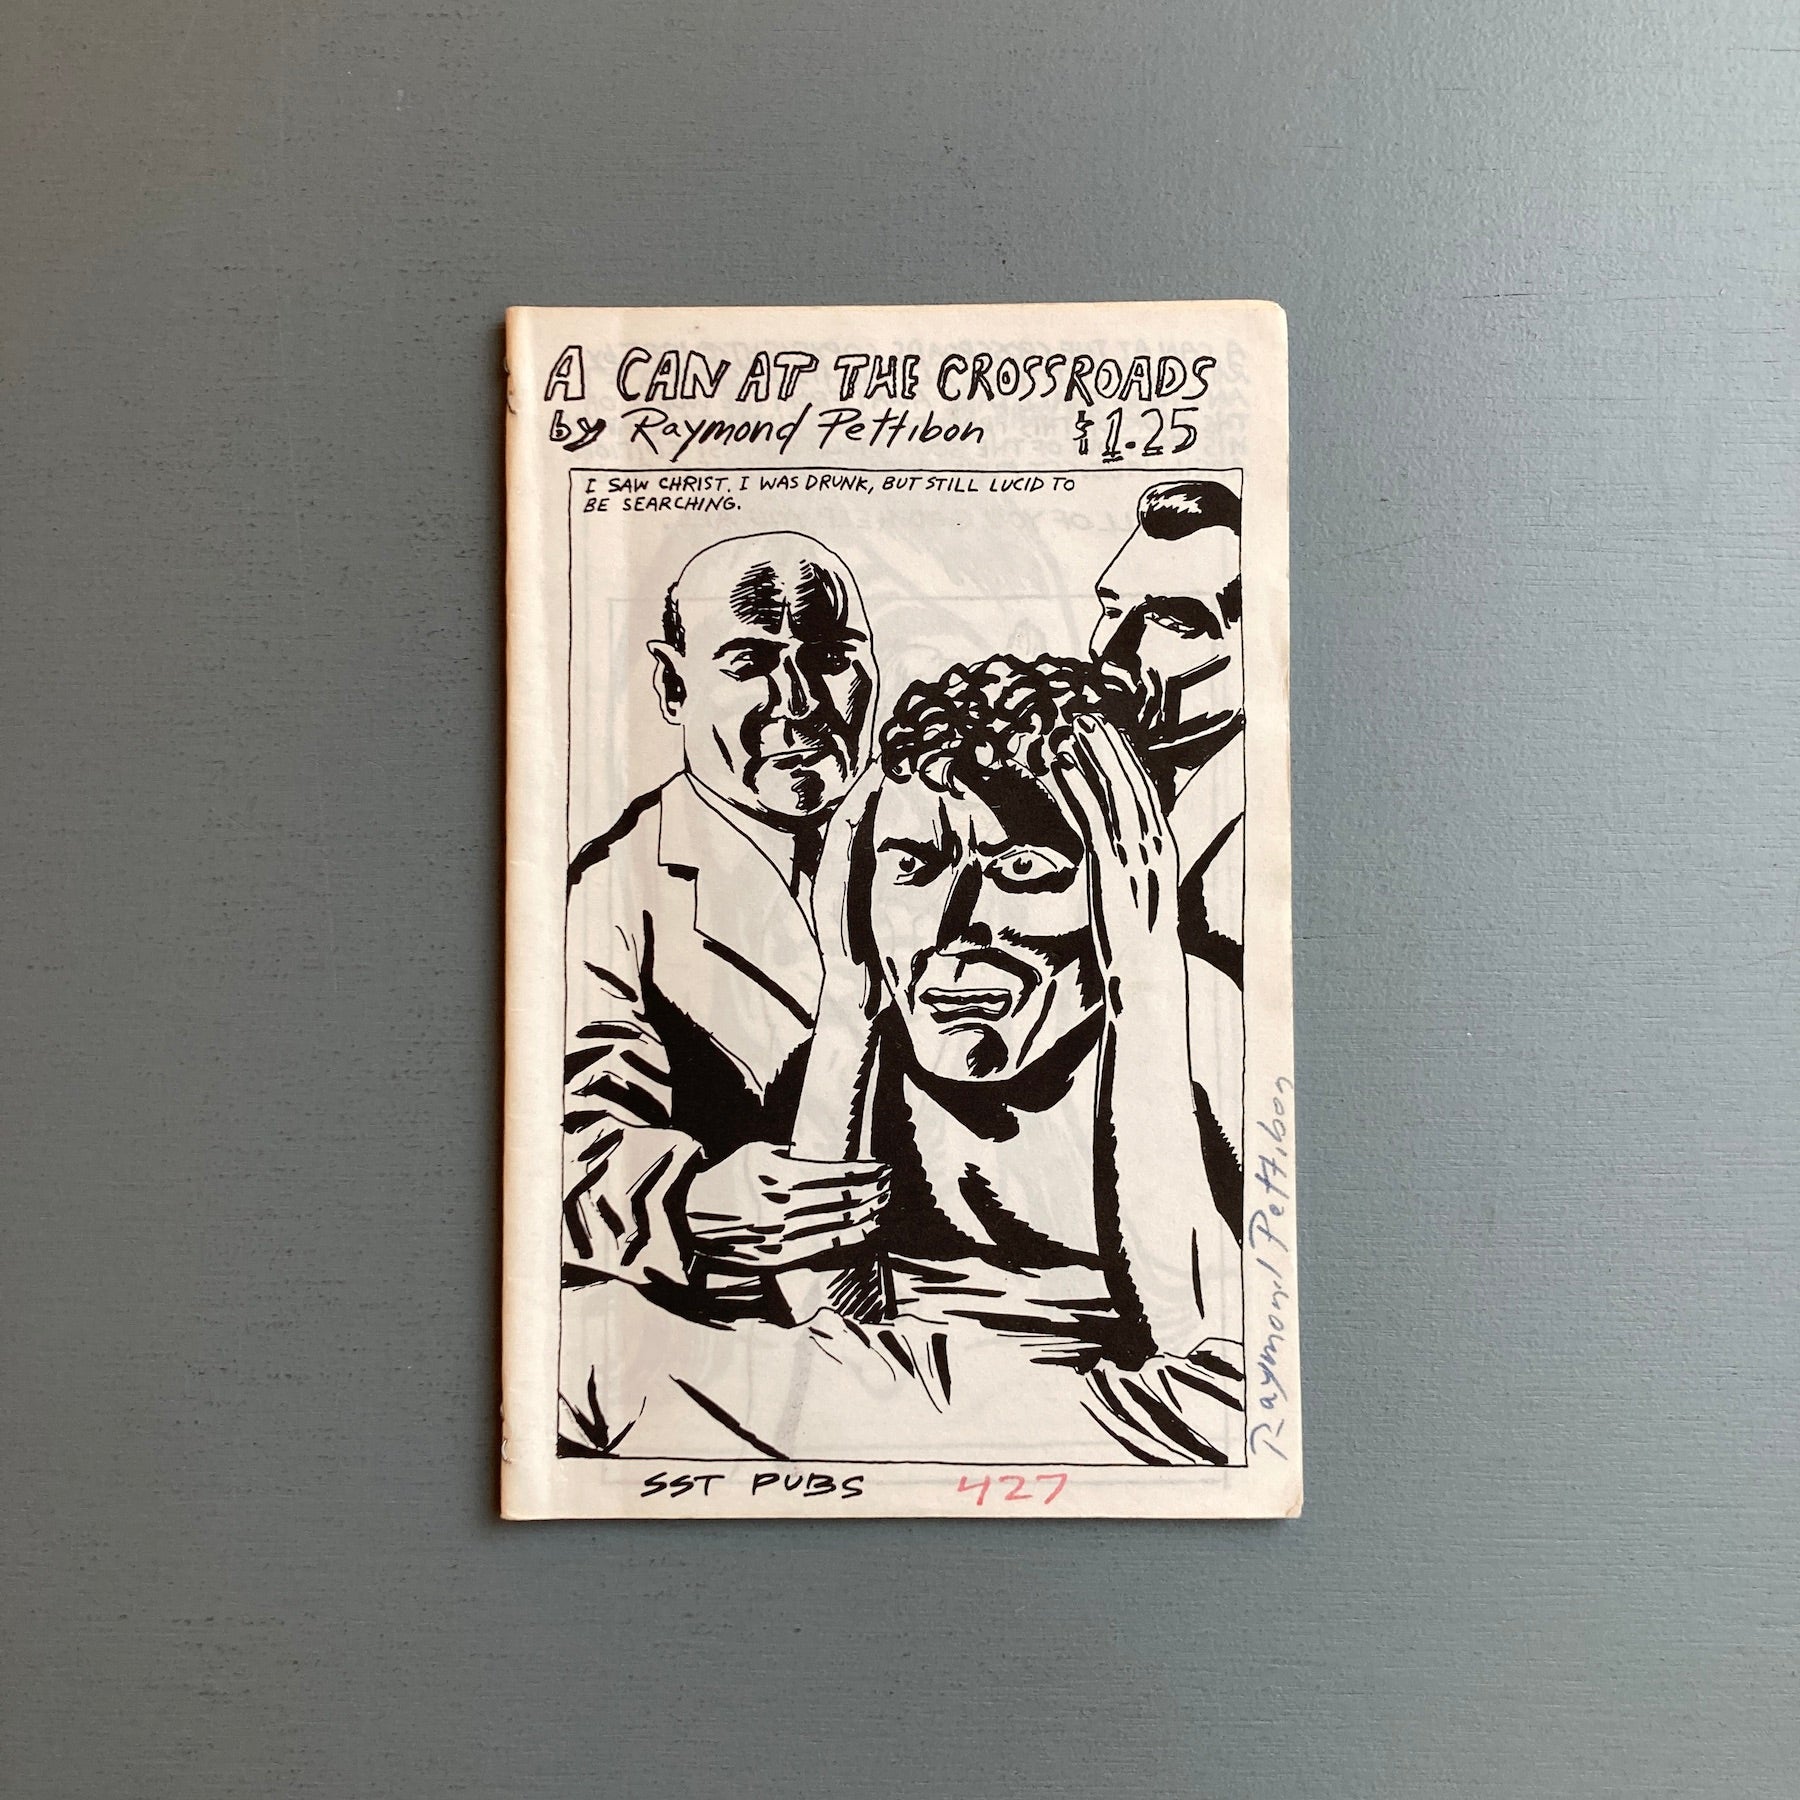 Raymond Pettibon (signed) - A can at the crossroads - SST Pubs 